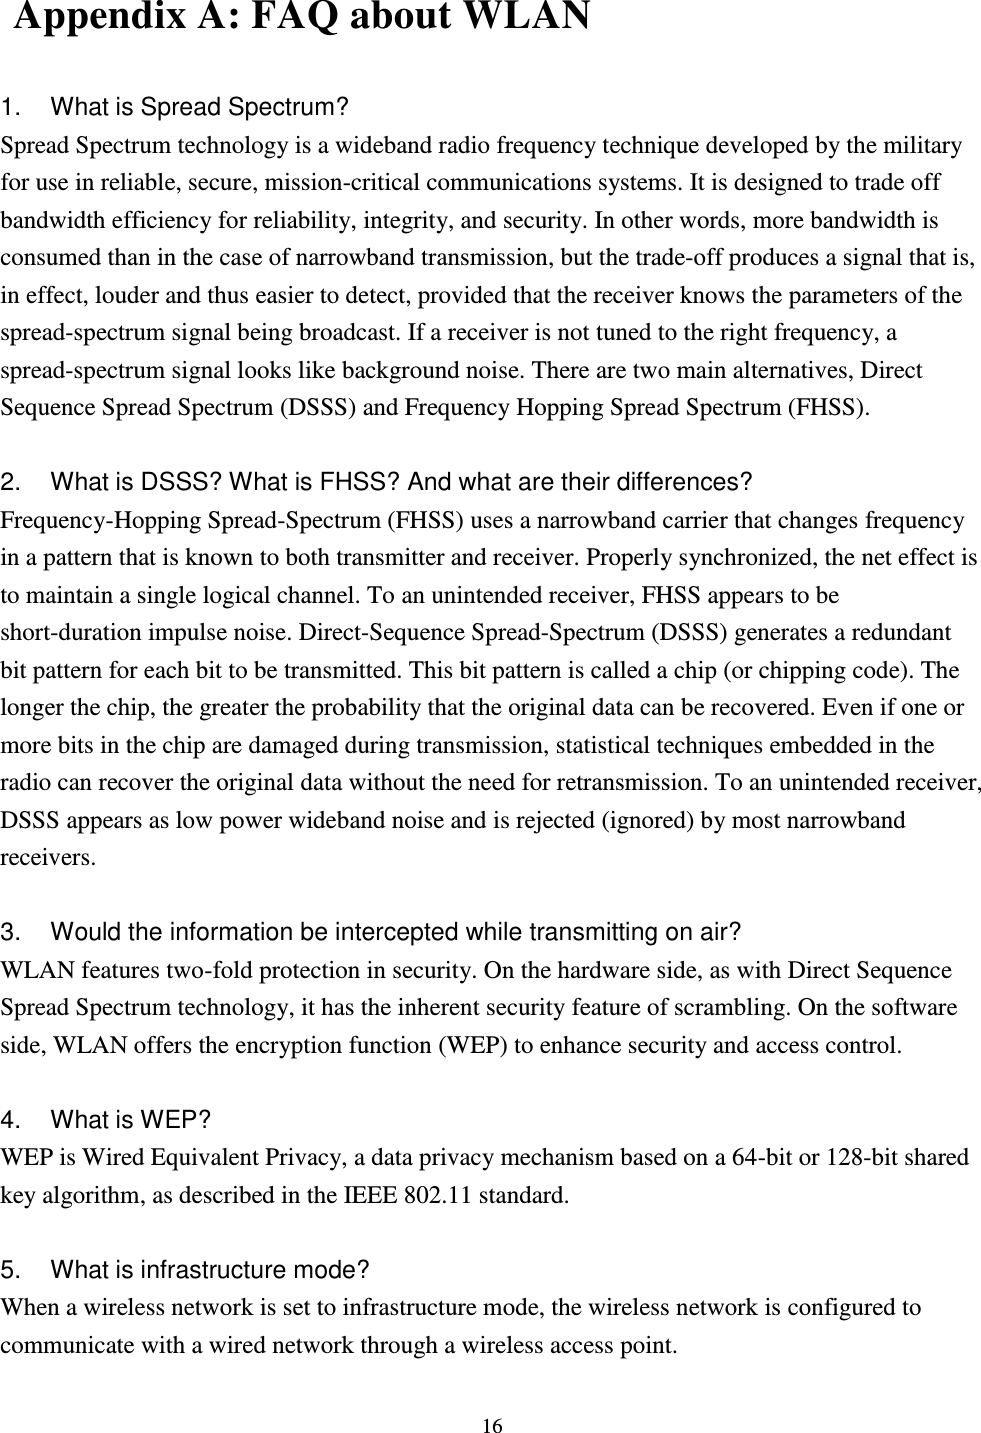  16   Appendix A: FAQ about WLAN  1.  What is Spread Spectrum? Spread Spectrum technology is a wideband radio frequency technique developed by the military for use in reliable, secure, mission-critical communications systems. It is designed to trade off bandwidth efficiency for reliability, integrity, and security. In other words, more bandwidth is consumed than in the case of narrowband transmission, but the trade-off produces a signal that is, in effect, louder and thus easier to detect, provided that the receiver knows the parameters of the spread-spectrum signal being broadcast. If a receiver is not tuned to the right frequency, a spread-spectrum signal looks like background noise. There are two main alternatives, Direct Sequence Spread Spectrum (DSSS) and Frequency Hopping Spread Spectrum (FHSS).  2.  What is DSSS? What is FHSS? And what are their differences? Frequency-Hopping Spread-Spectrum (FHSS) uses a narrowband carrier that changes frequency in a pattern that is known to both transmitter and receiver. Properly synchronized, the net effect is to maintain a single logical channel. To an unintended receiver, FHSS appears to be short-duration impulse noise. Direct-Sequence Spread-Spectrum (DSSS) generates a redundant bit pattern for each bit to be transmitted. This bit pattern is called a chip (or chipping code). The longer the chip, the greater the probability that the original data can be recovered. Even if one or more bits in the chip are damaged during transmission, statistical techniques embedded in the radio can recover the original data without the need for retransmission. To an unintended receiver, DSSS appears as low power wideband noise and is rejected (ignored) by most narrowband receivers.  3.  Would the information be intercepted while transmitting on air? WLAN features two-fold protection in security. On the hardware side, as with Direct Sequence Spread Spectrum technology, it has the inherent security feature of scrambling. On the software side, WLAN offers the encryption function (WEP) to enhance security and access control.  4.  What is WEP? WEP is Wired Equivalent Privacy, a data privacy mechanism based on a 64-bit or 128-bit shared key algorithm, as described in the IEEE 802.11 standard.    5.  What is infrastructure mode? When a wireless network is set to infrastructure mode, the wireless network is configured to communicate with a wired network through a wireless access point. 